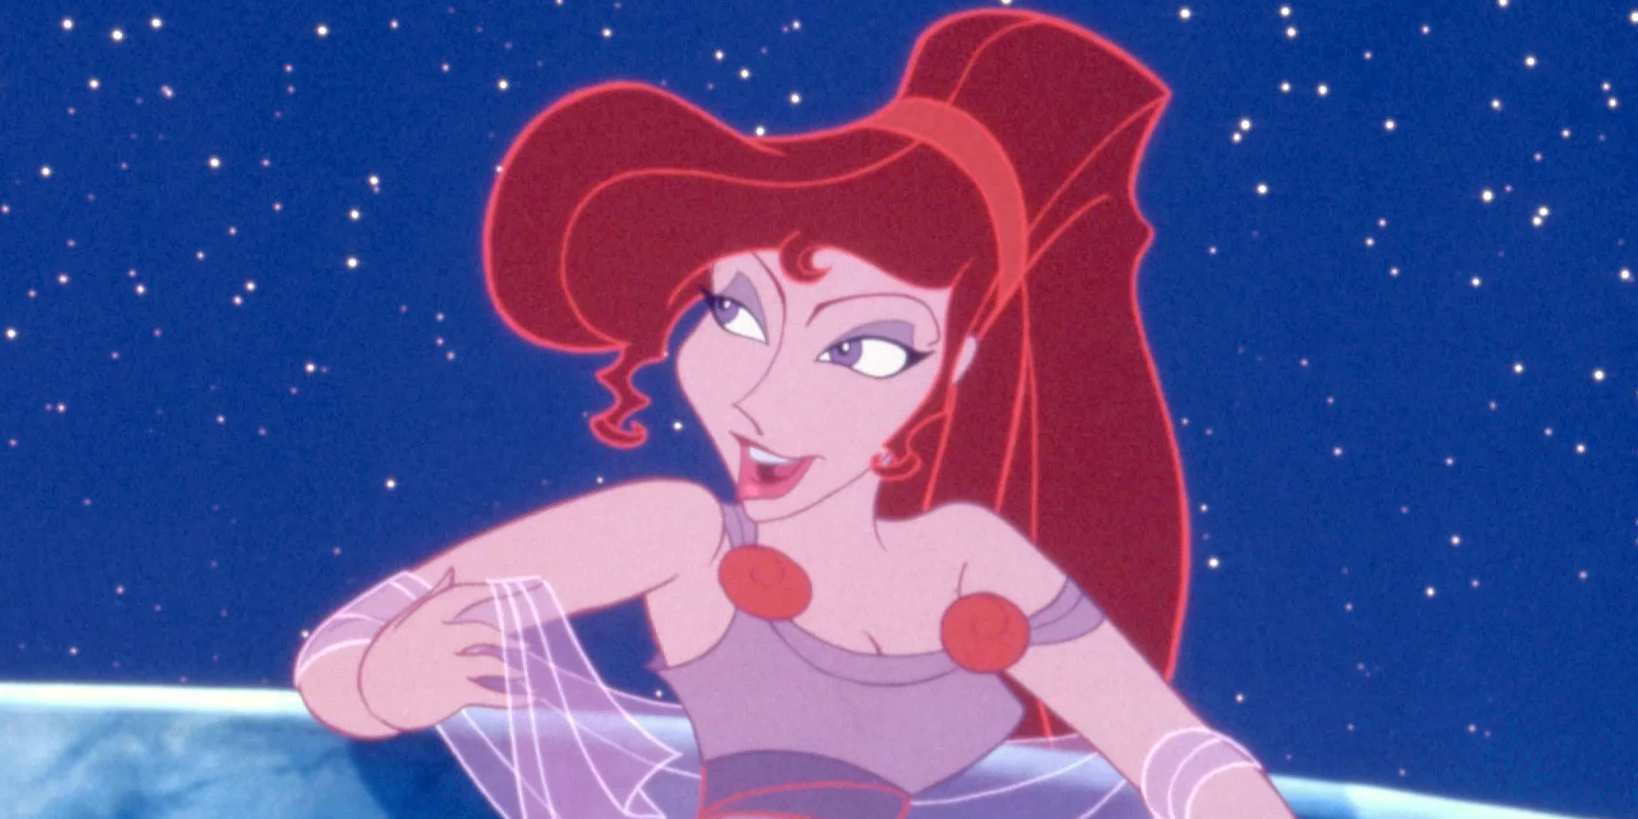 10 Disney Characters Who Aren't Officially Princesses (But Should Be)